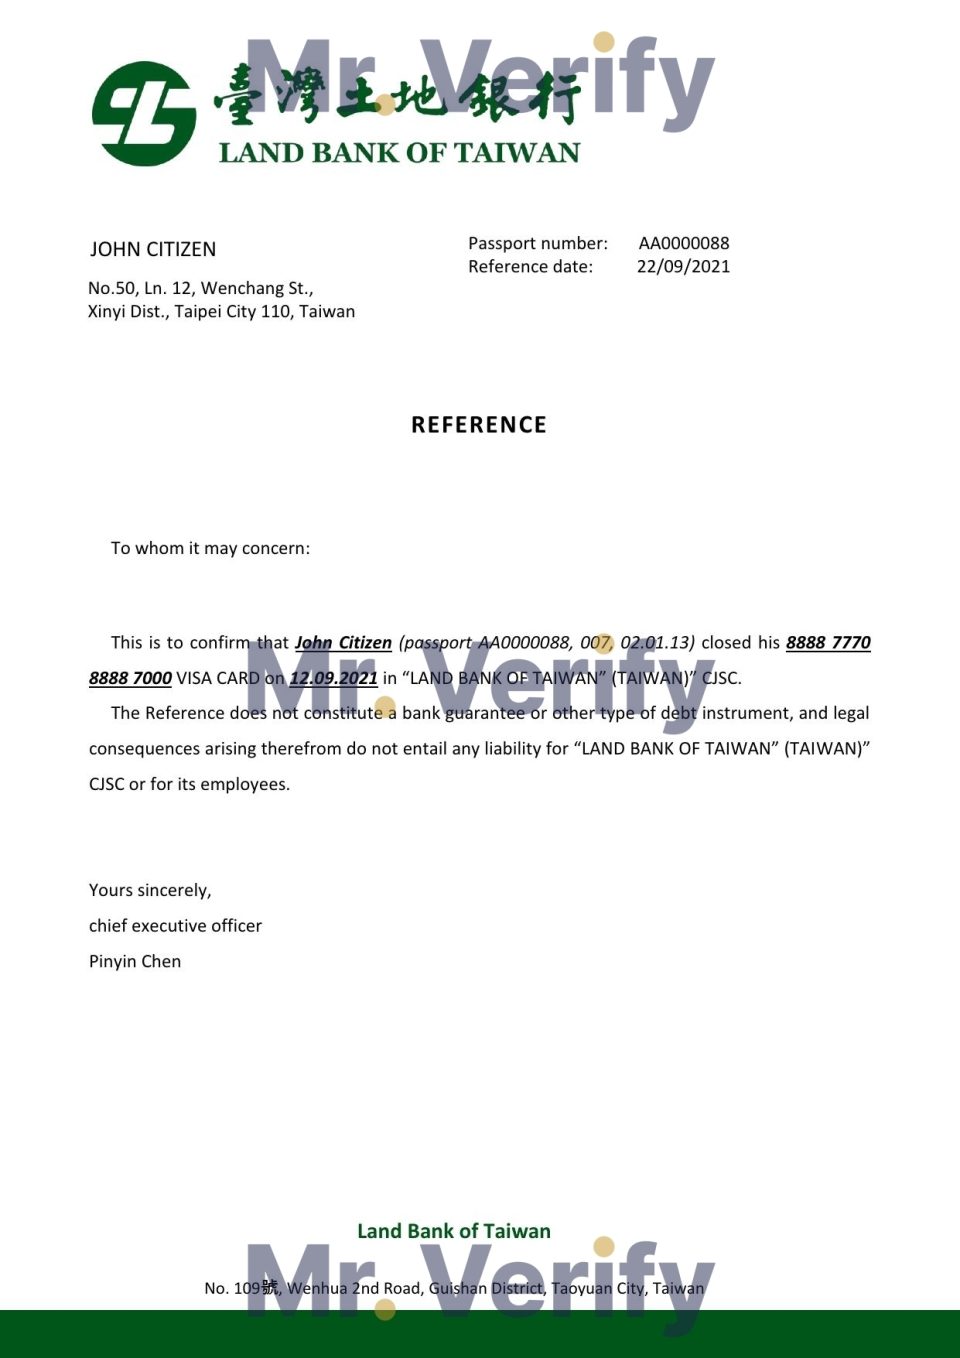 Download Taiwan Land Bank Reference Letter Templates | Editable Word